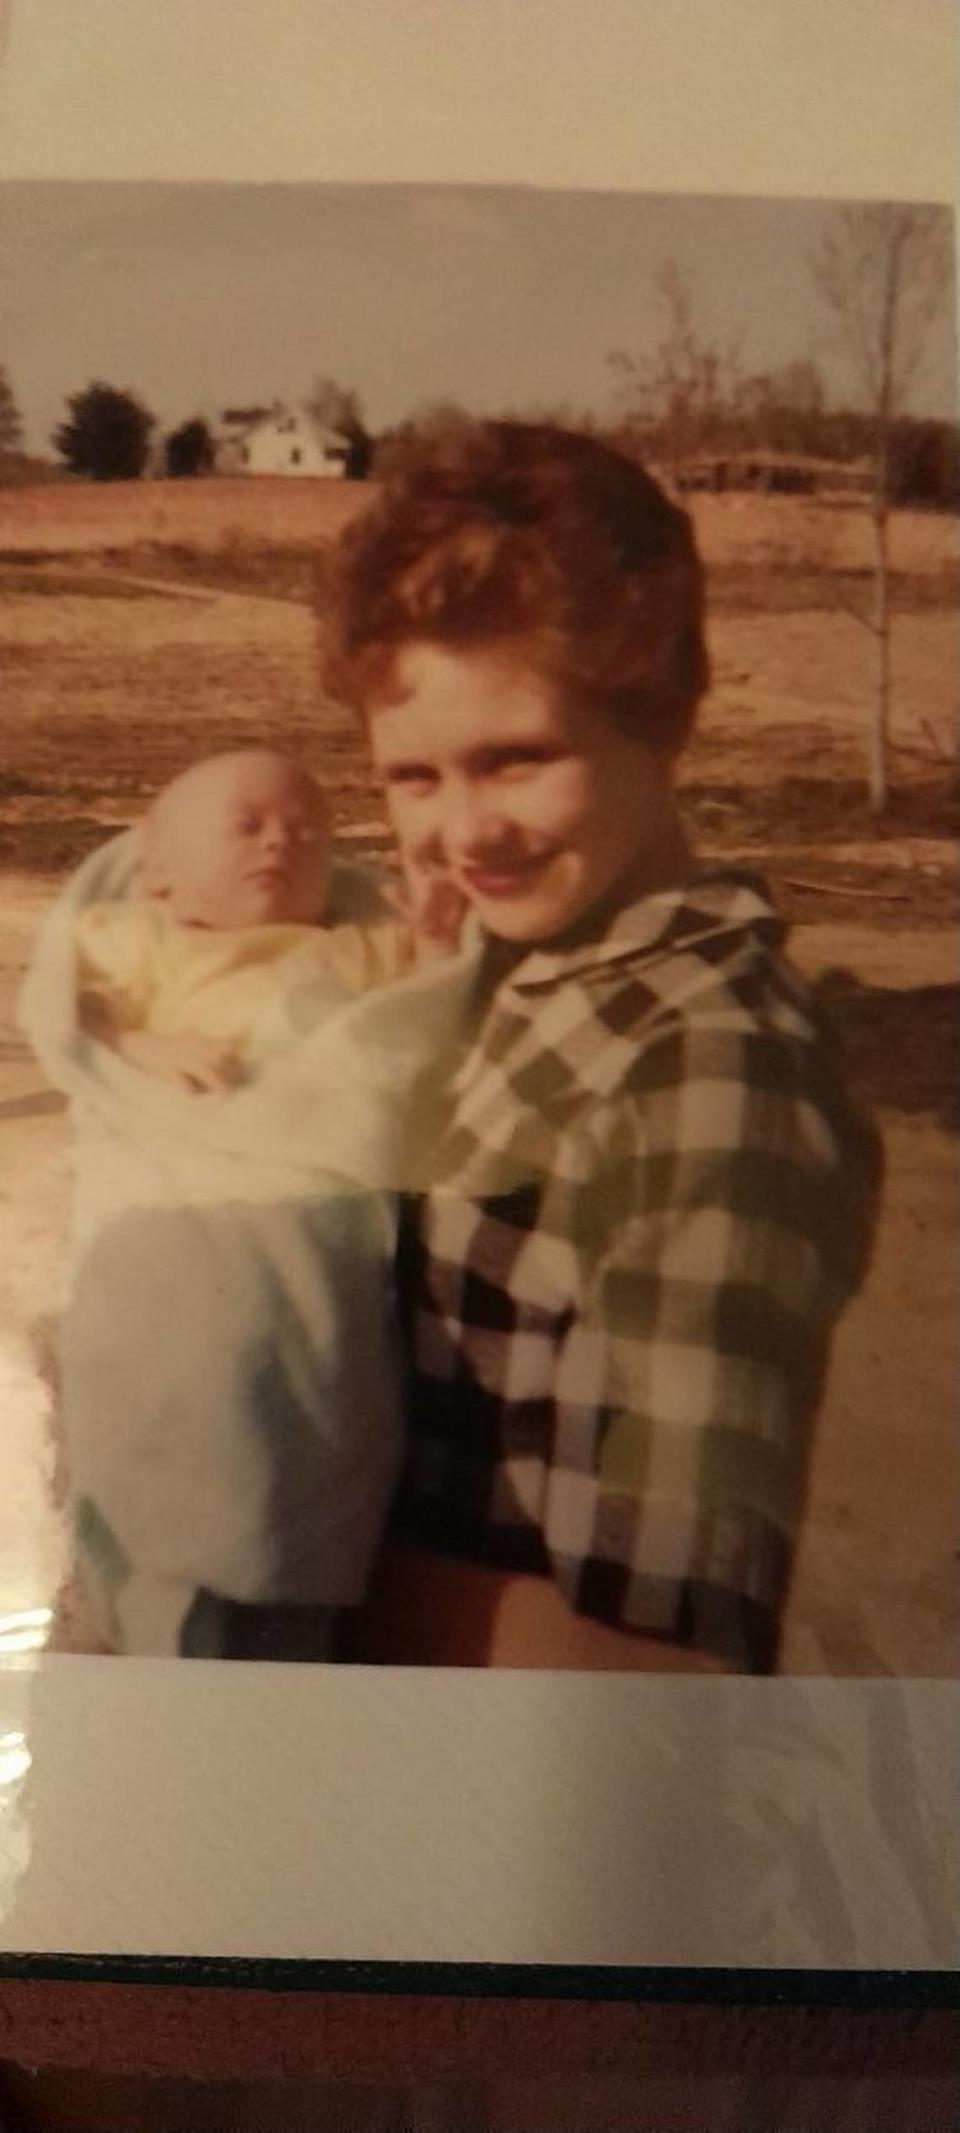 A family photo of Virginia Higgins Ray, a woman who died in a Richland County hospital and was unidentified for more than 40 years, the coroner’s office said.